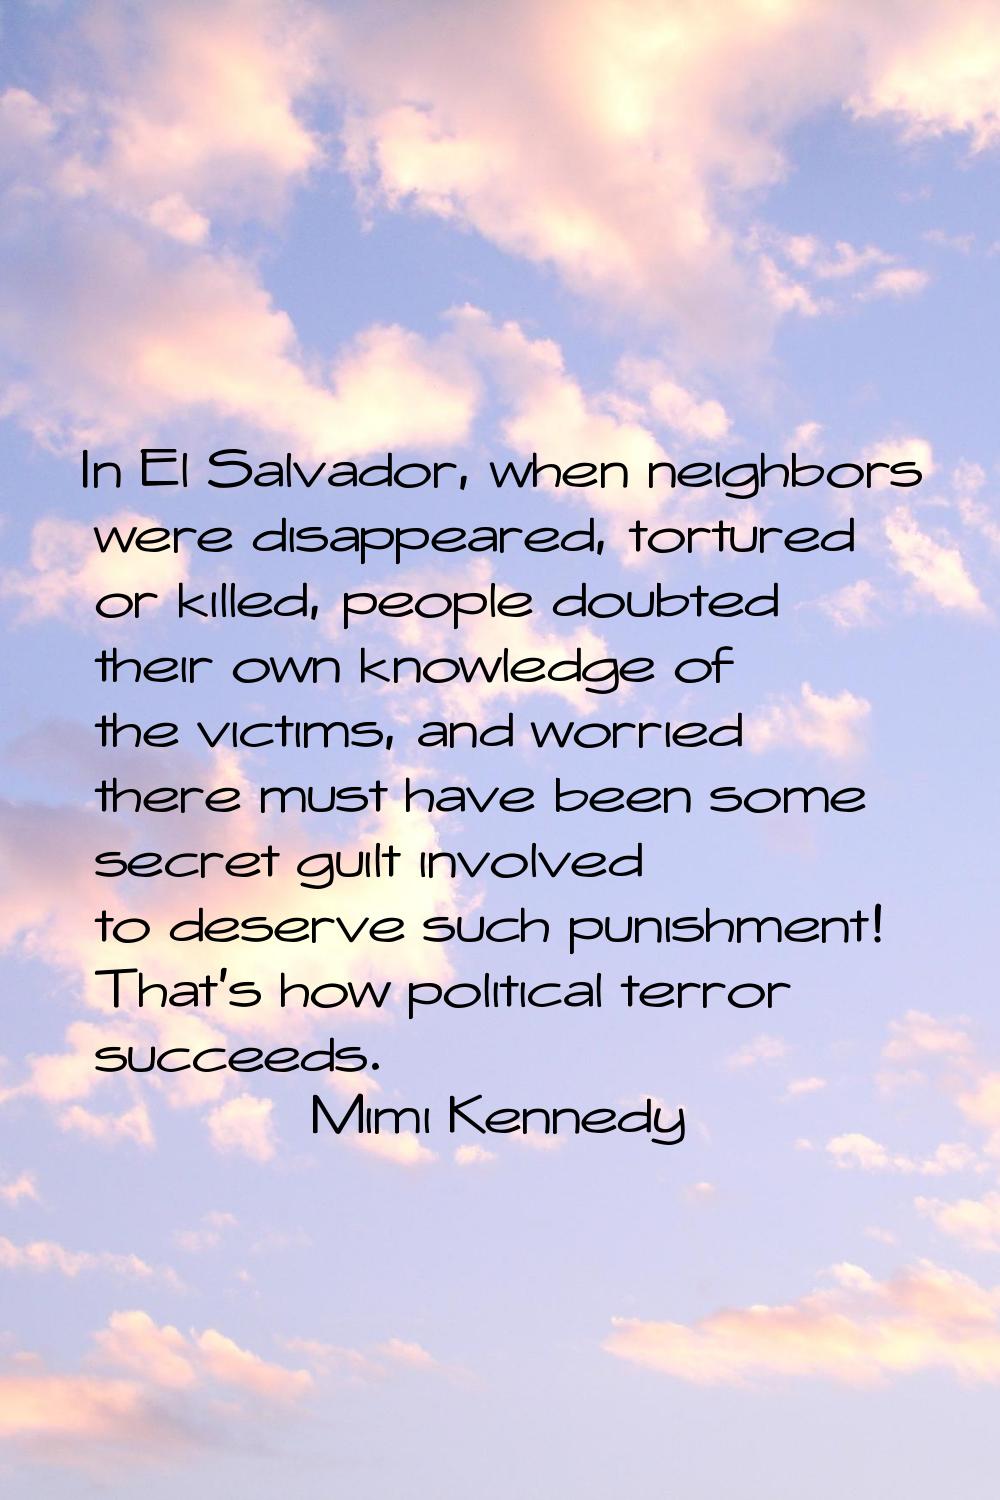 In El Salvador, when neighbors were disappeared, tortured or killed, people doubted their own knowl